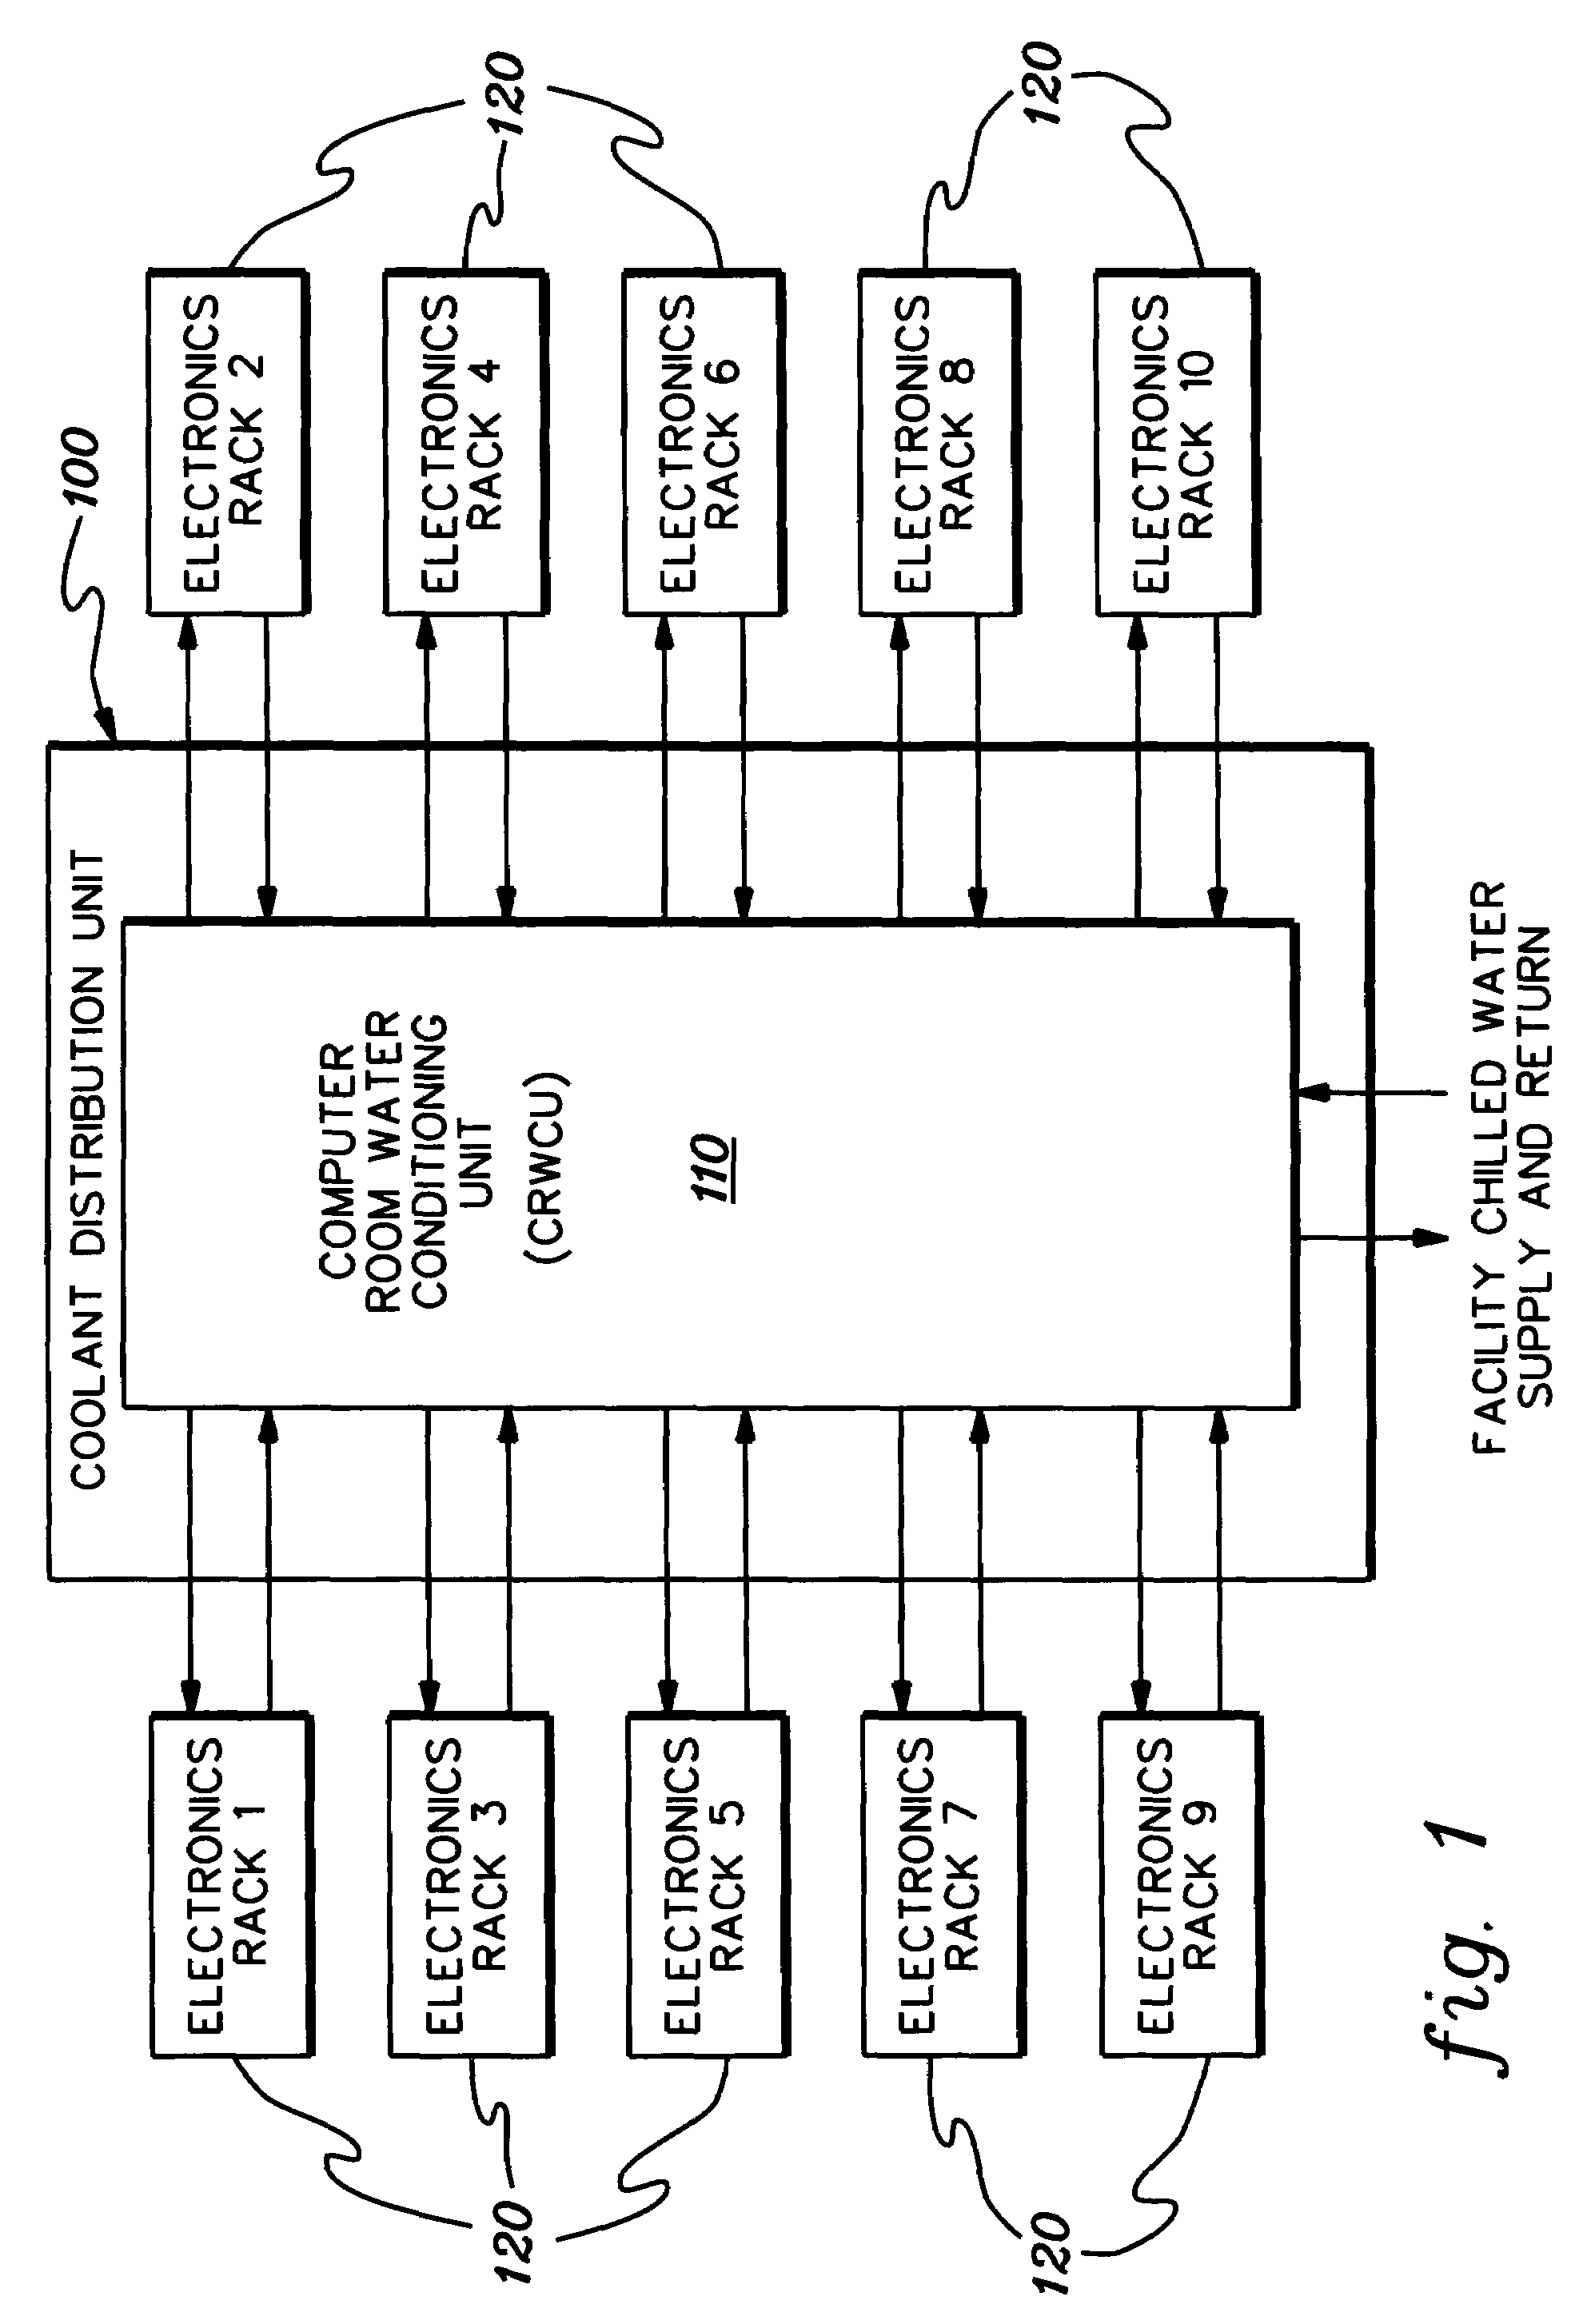 Cooling system and method employing multiple dedicated coolant conditioning units for cooling multiple electronics subsystems